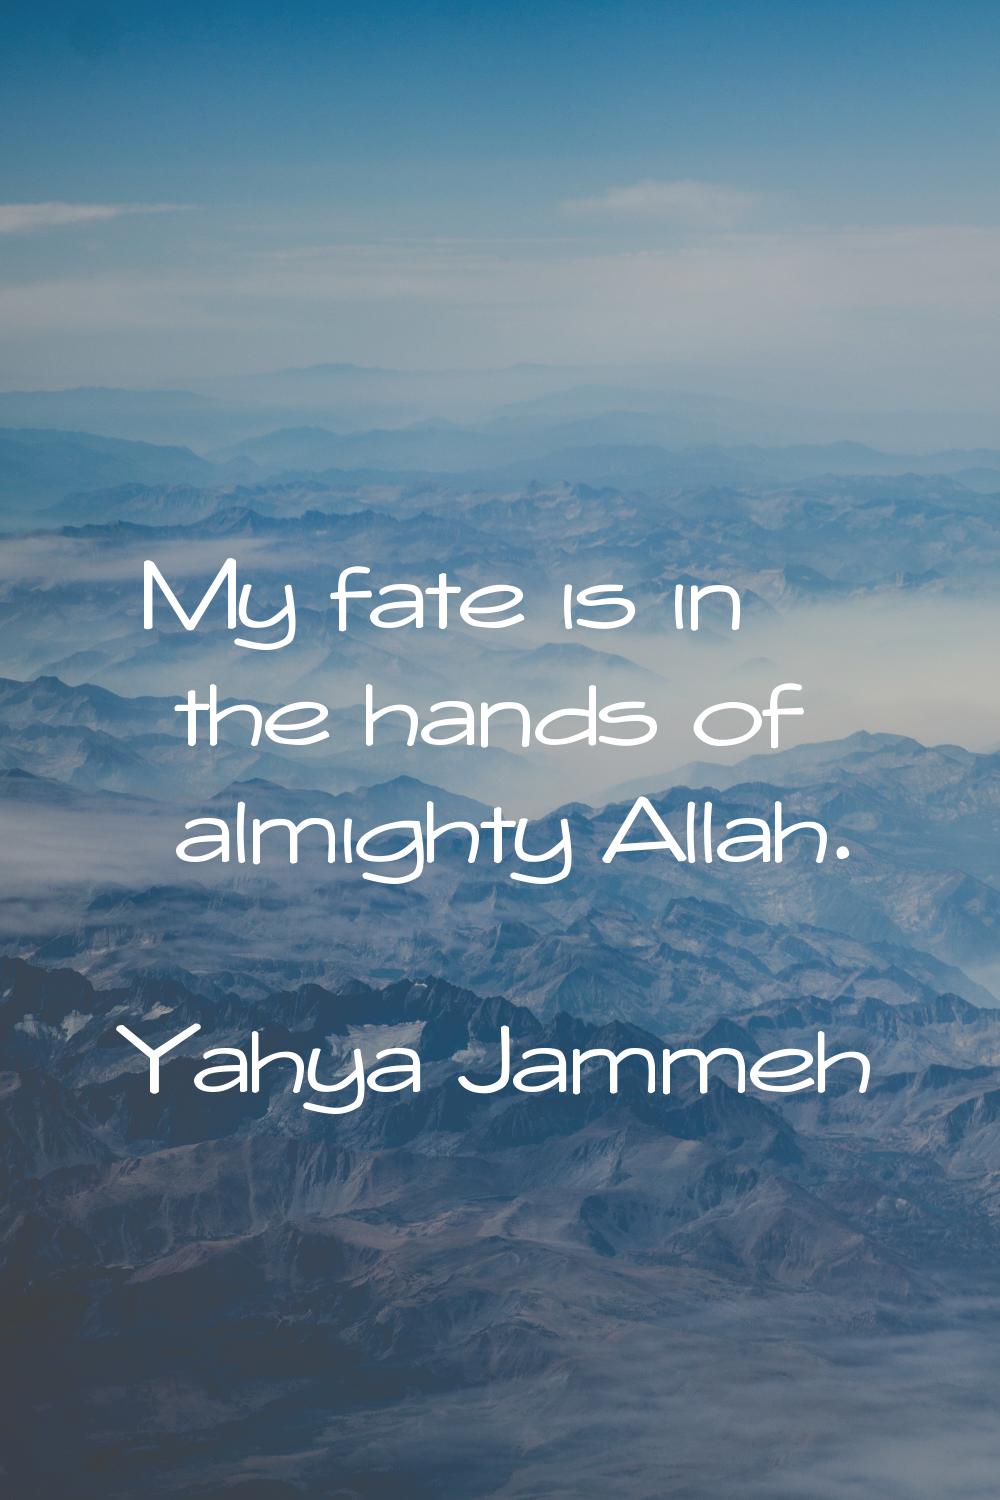 My fate is in the hands of almighty Allah.